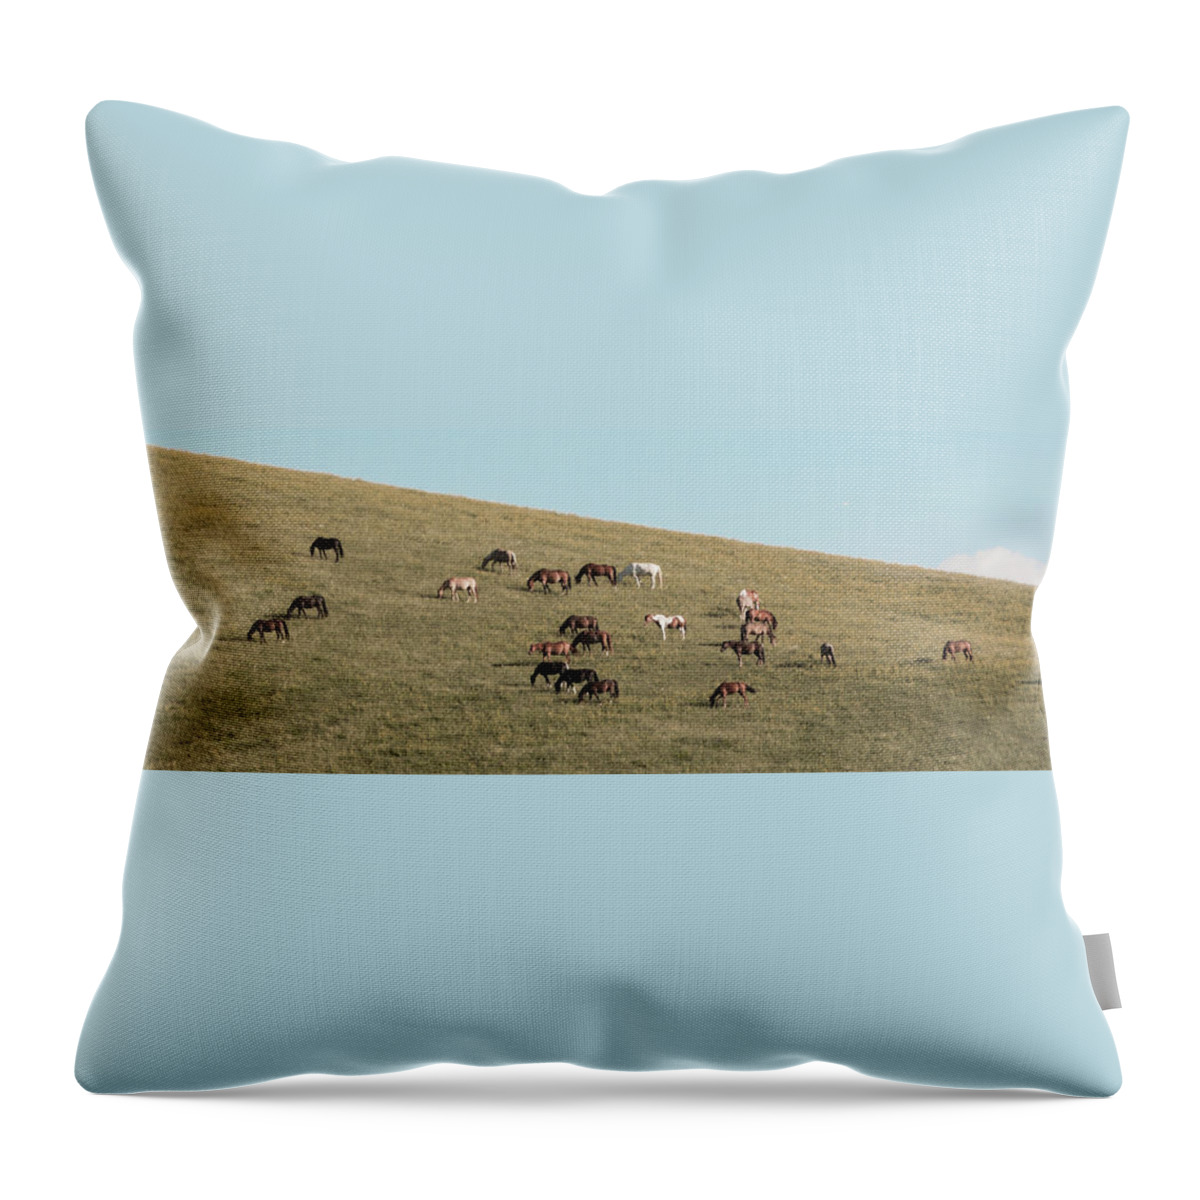 Horses Throw Pillow featuring the photograph Horses On The Hill by D K Wall